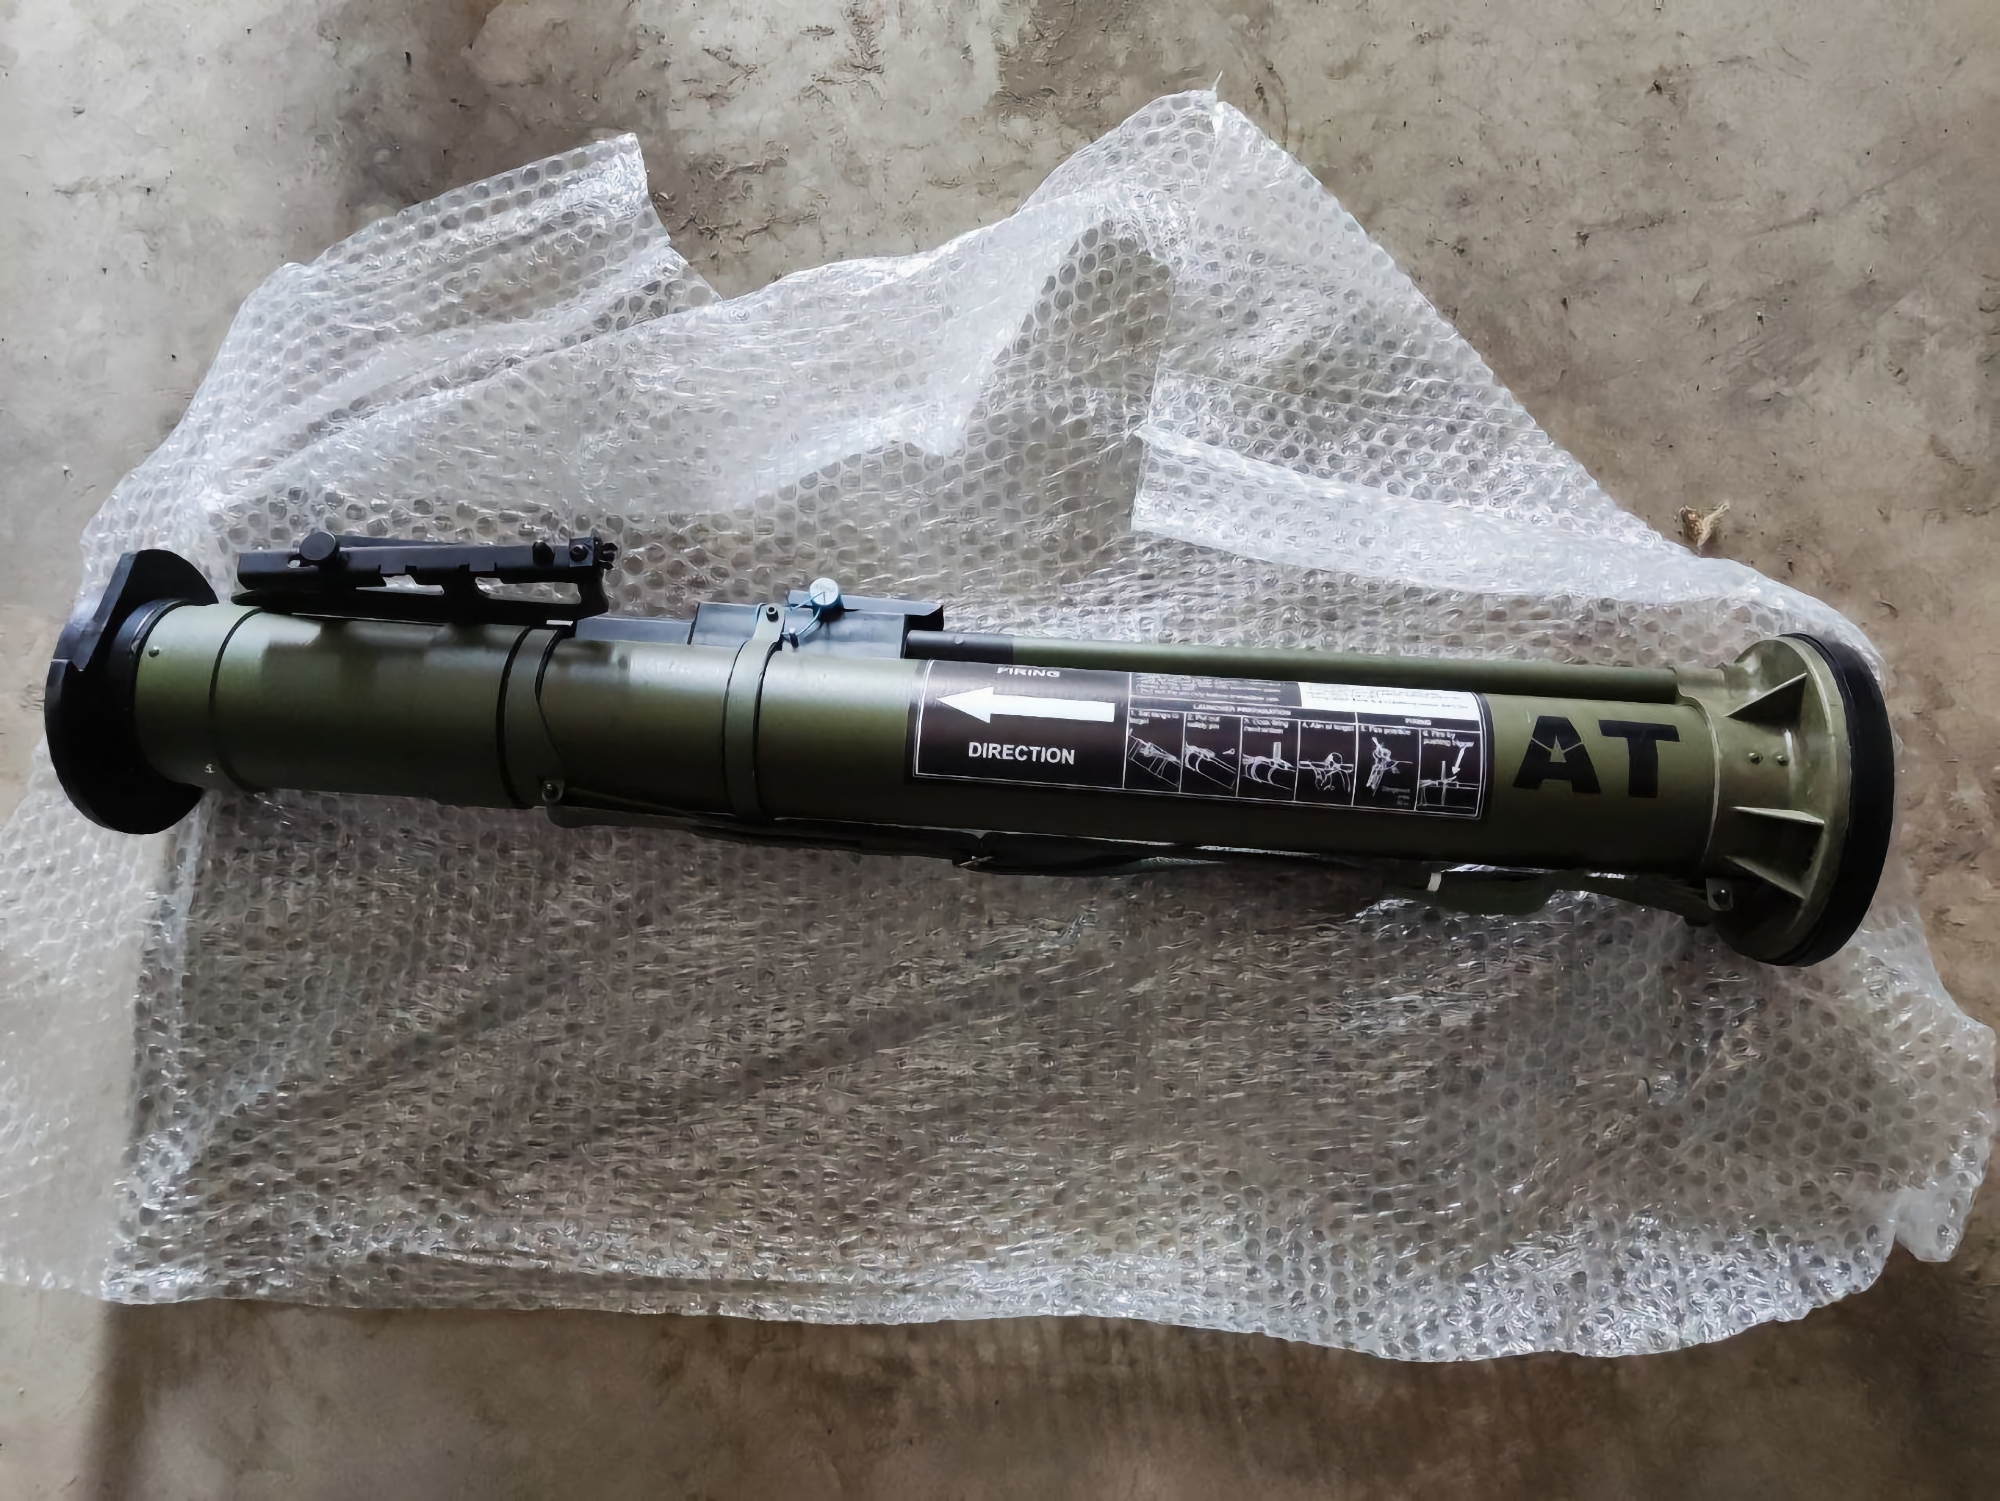 The AFU uses Bulgarian BULSPIKE-AT anti-tank grenade launchers, a modified version of the Soviet RPG-22 